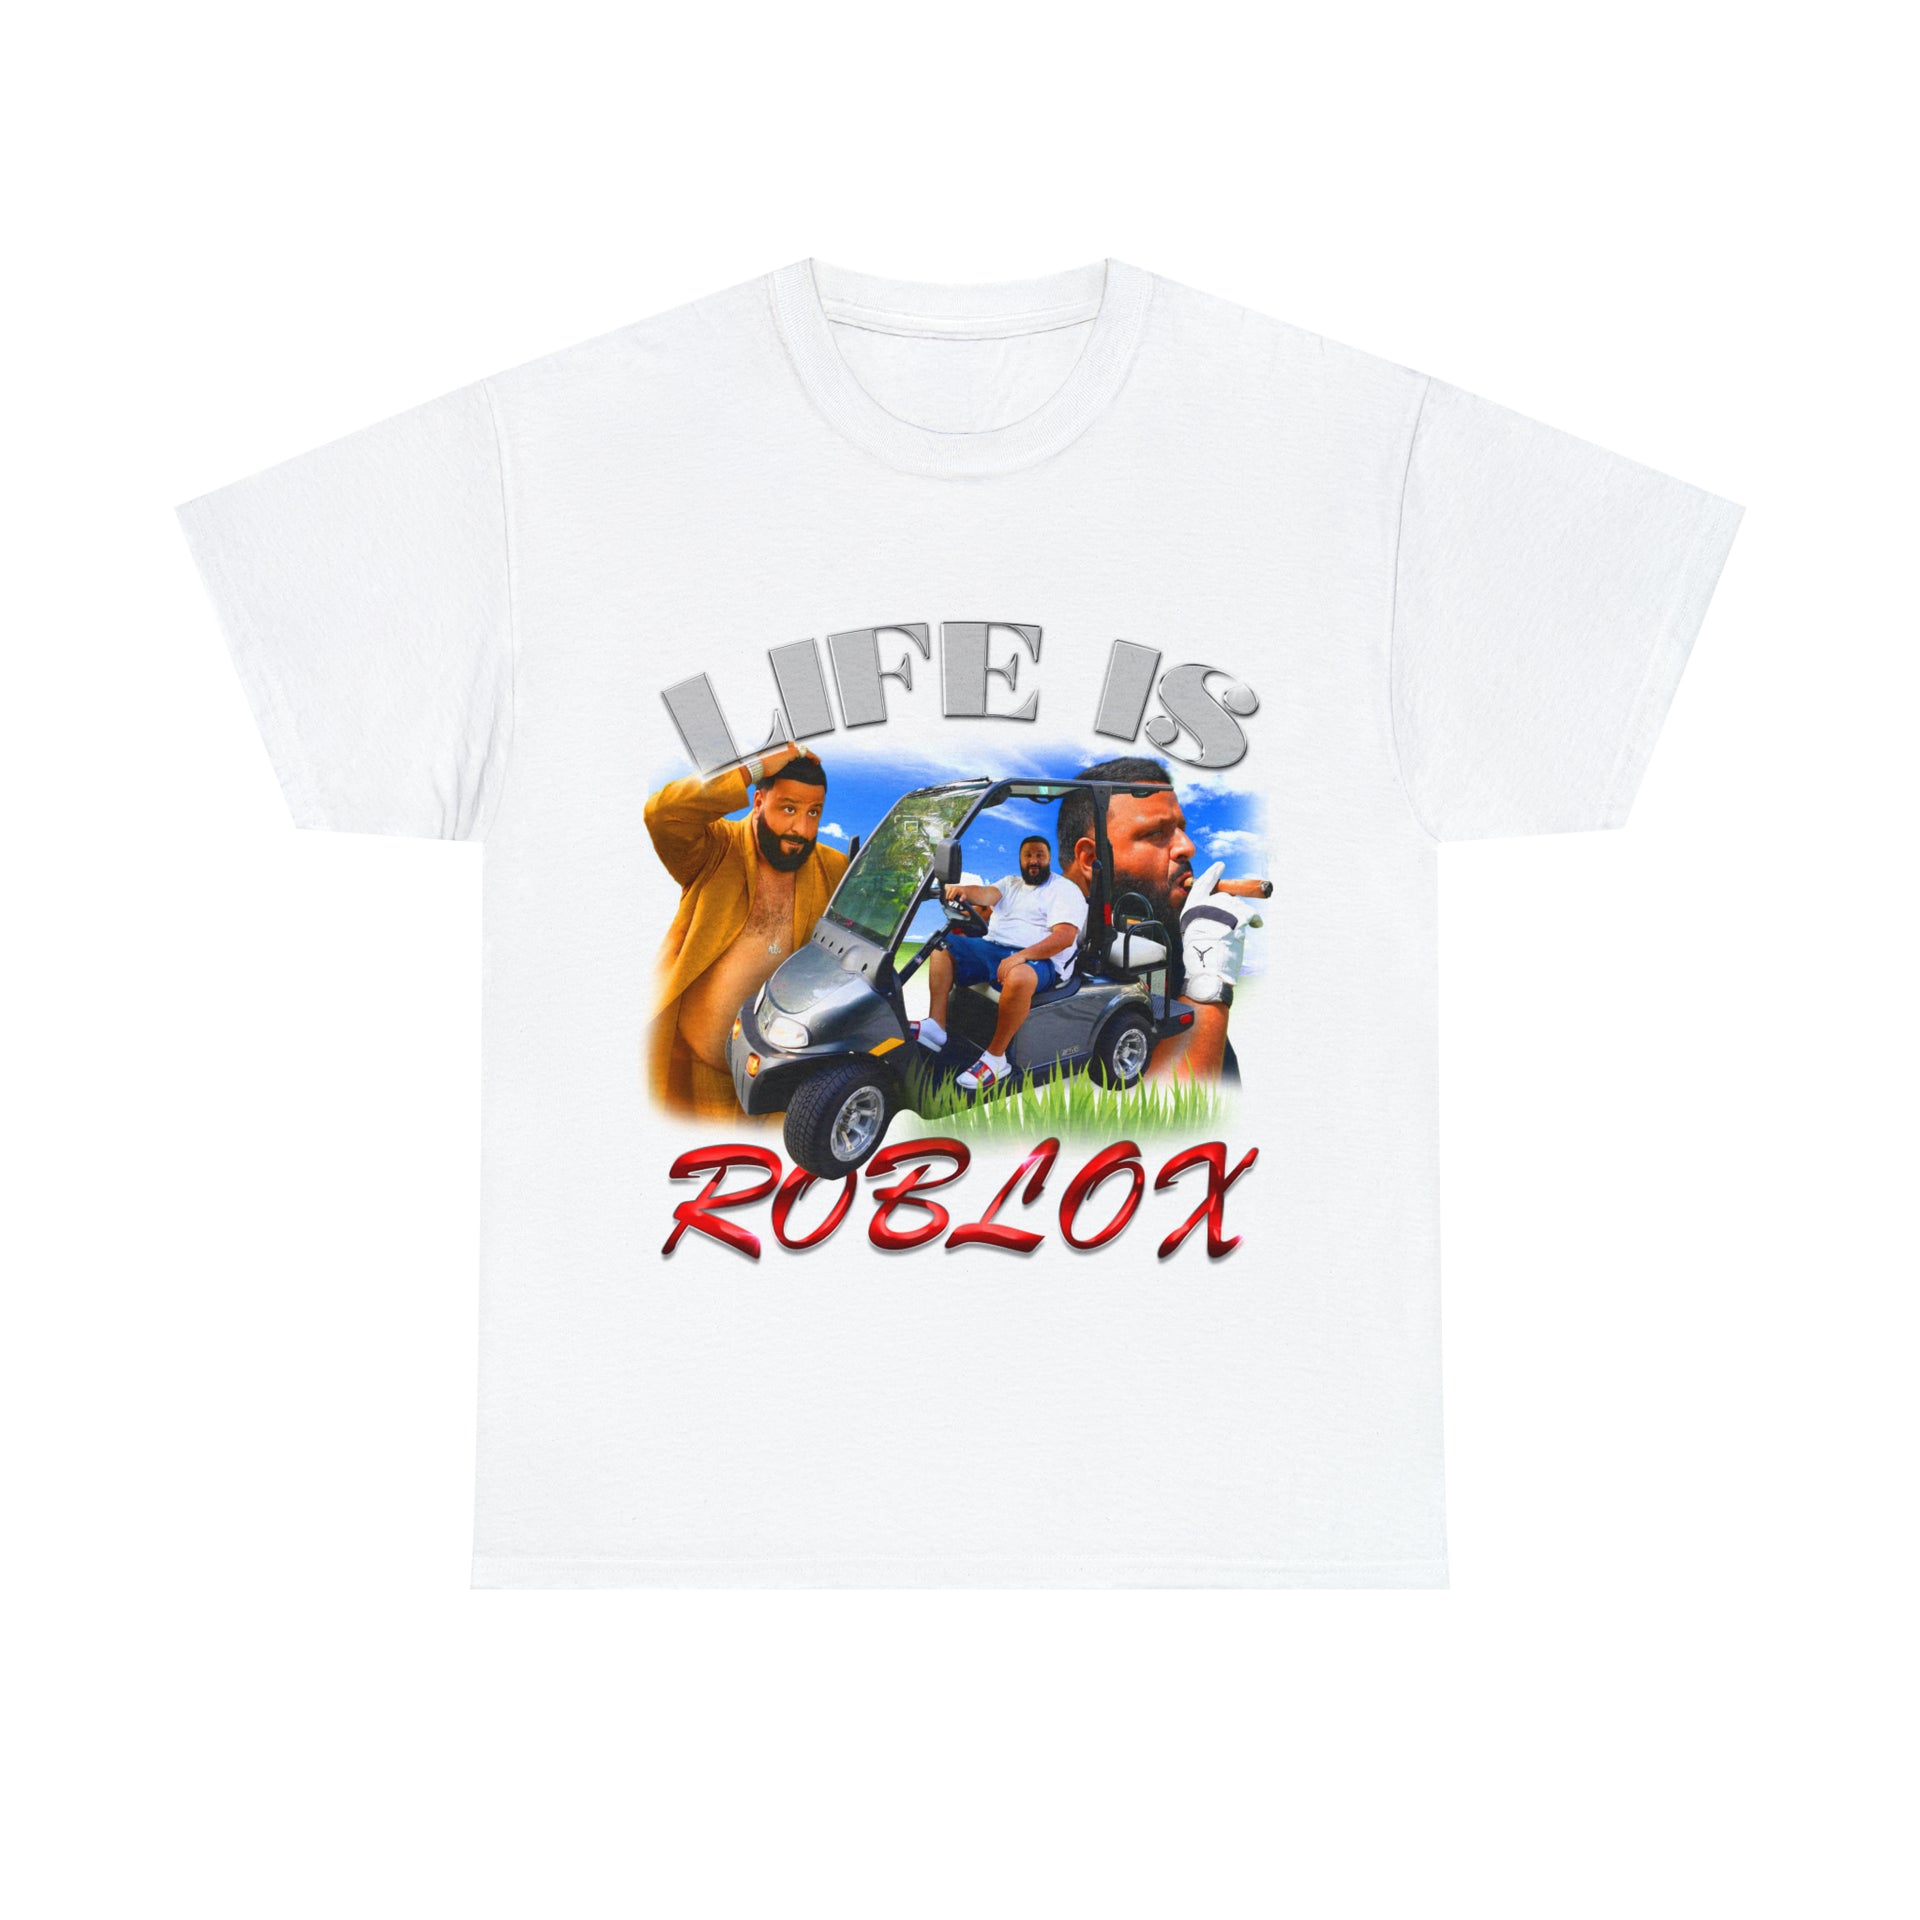 Life is Roblox Essential T-Shirt for Sale by Essiny Designs